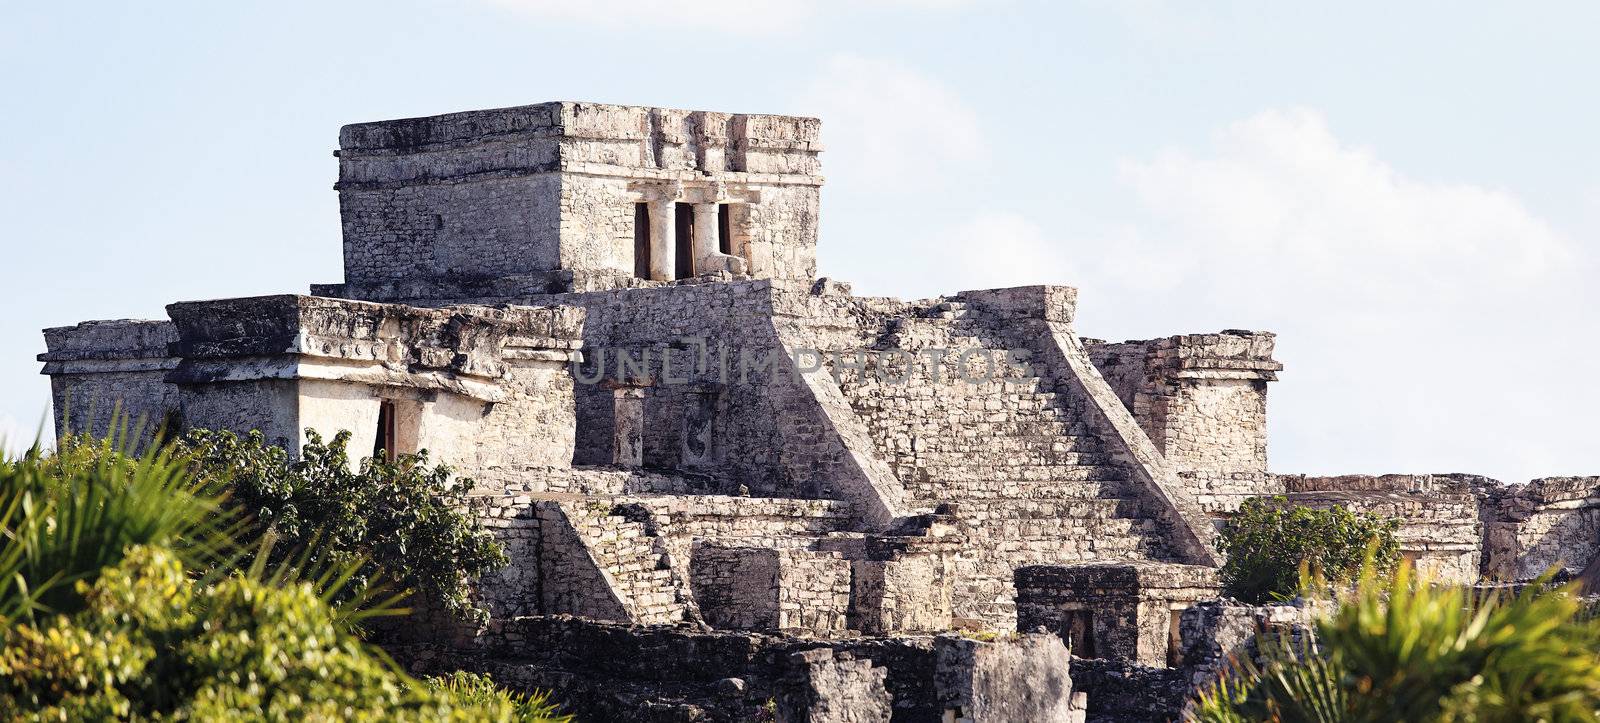 panoramic view of famous archaeological ruins of Tulum